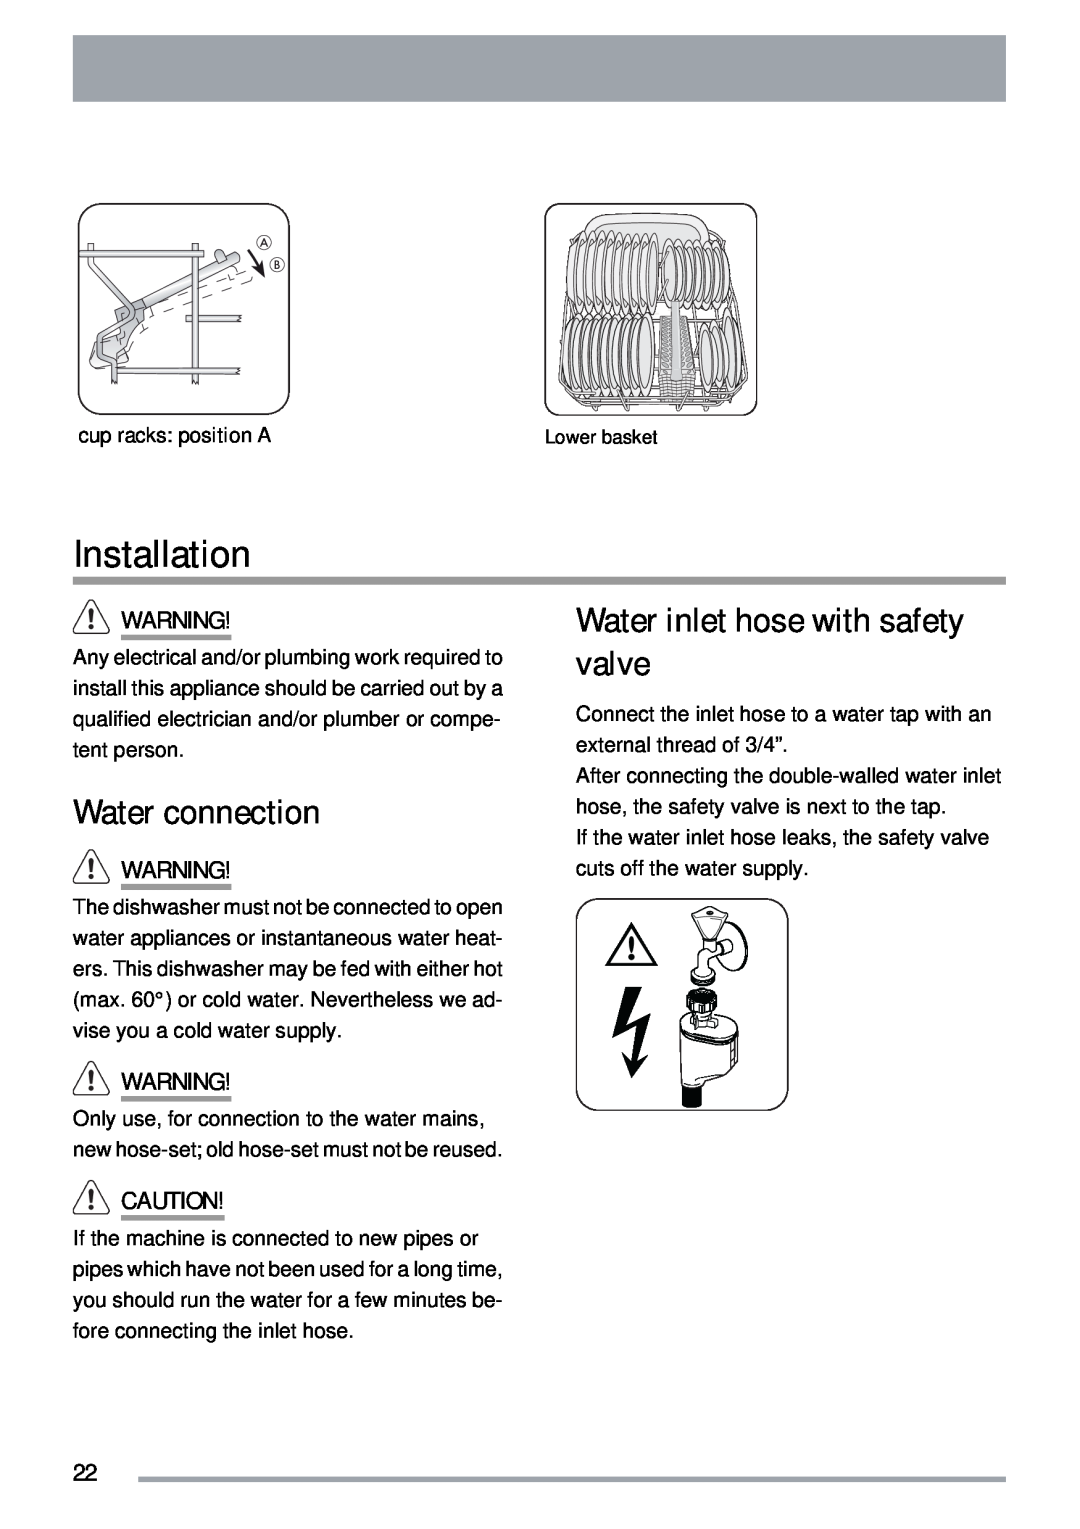 Zanussi ZDTS 101 user manual Installation, Water connection, Water inlet hose with safety valve 